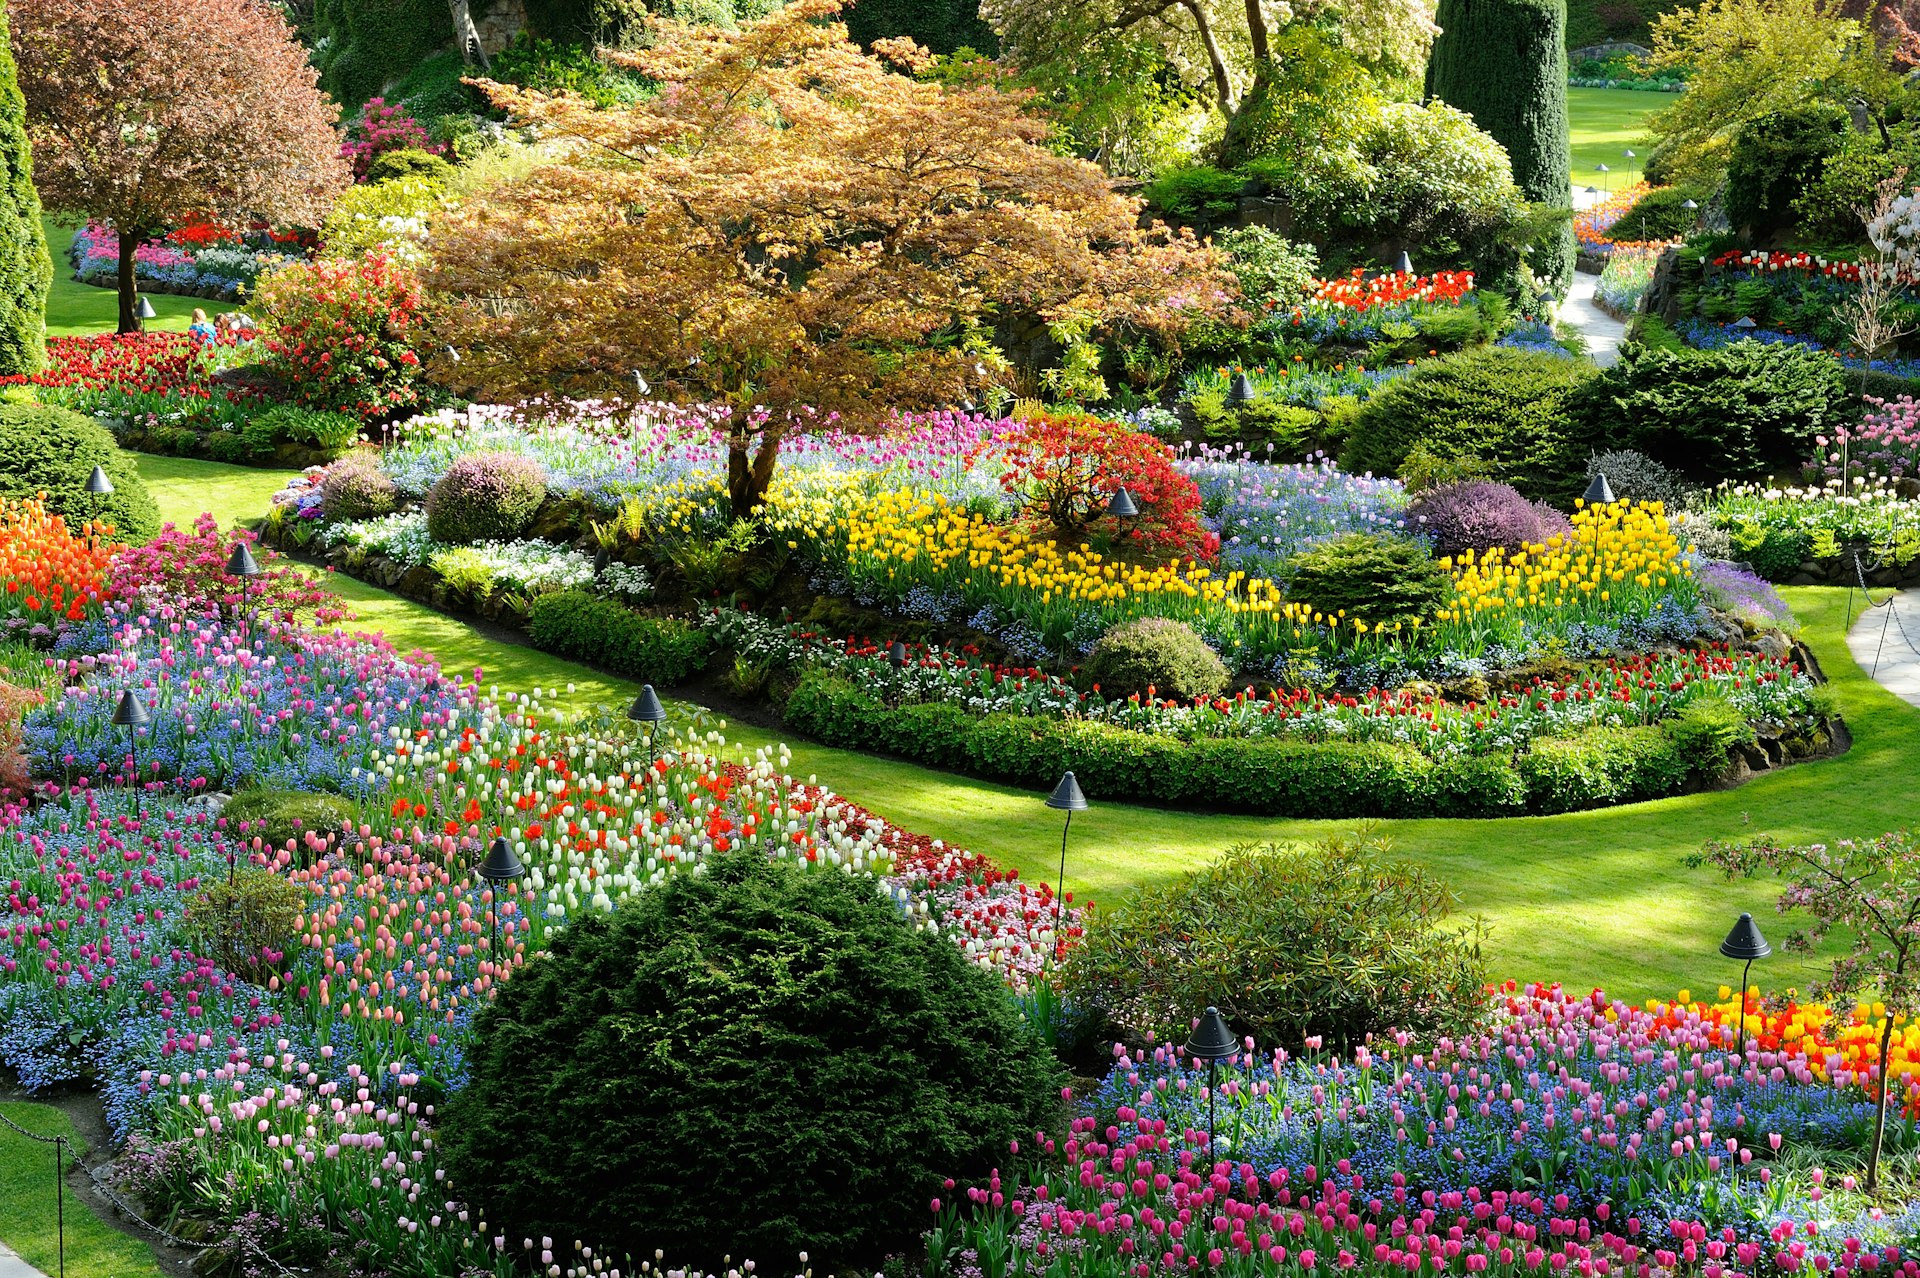 Butchart Gardens on Vancouver Island during spring